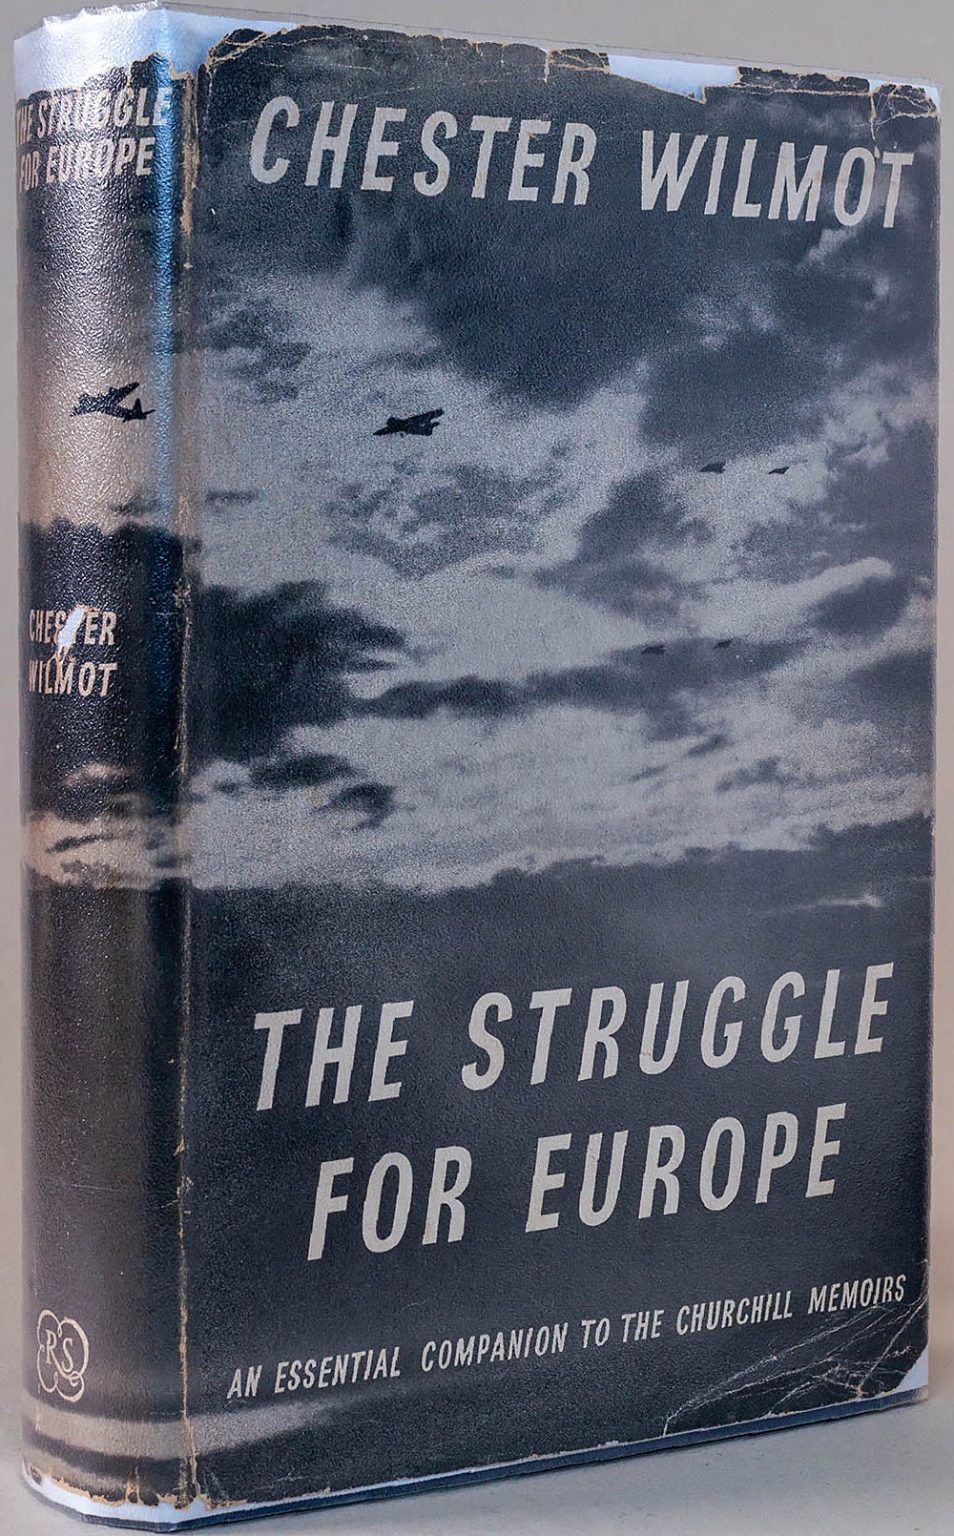 THE STRUGGLE FOR EUROPE